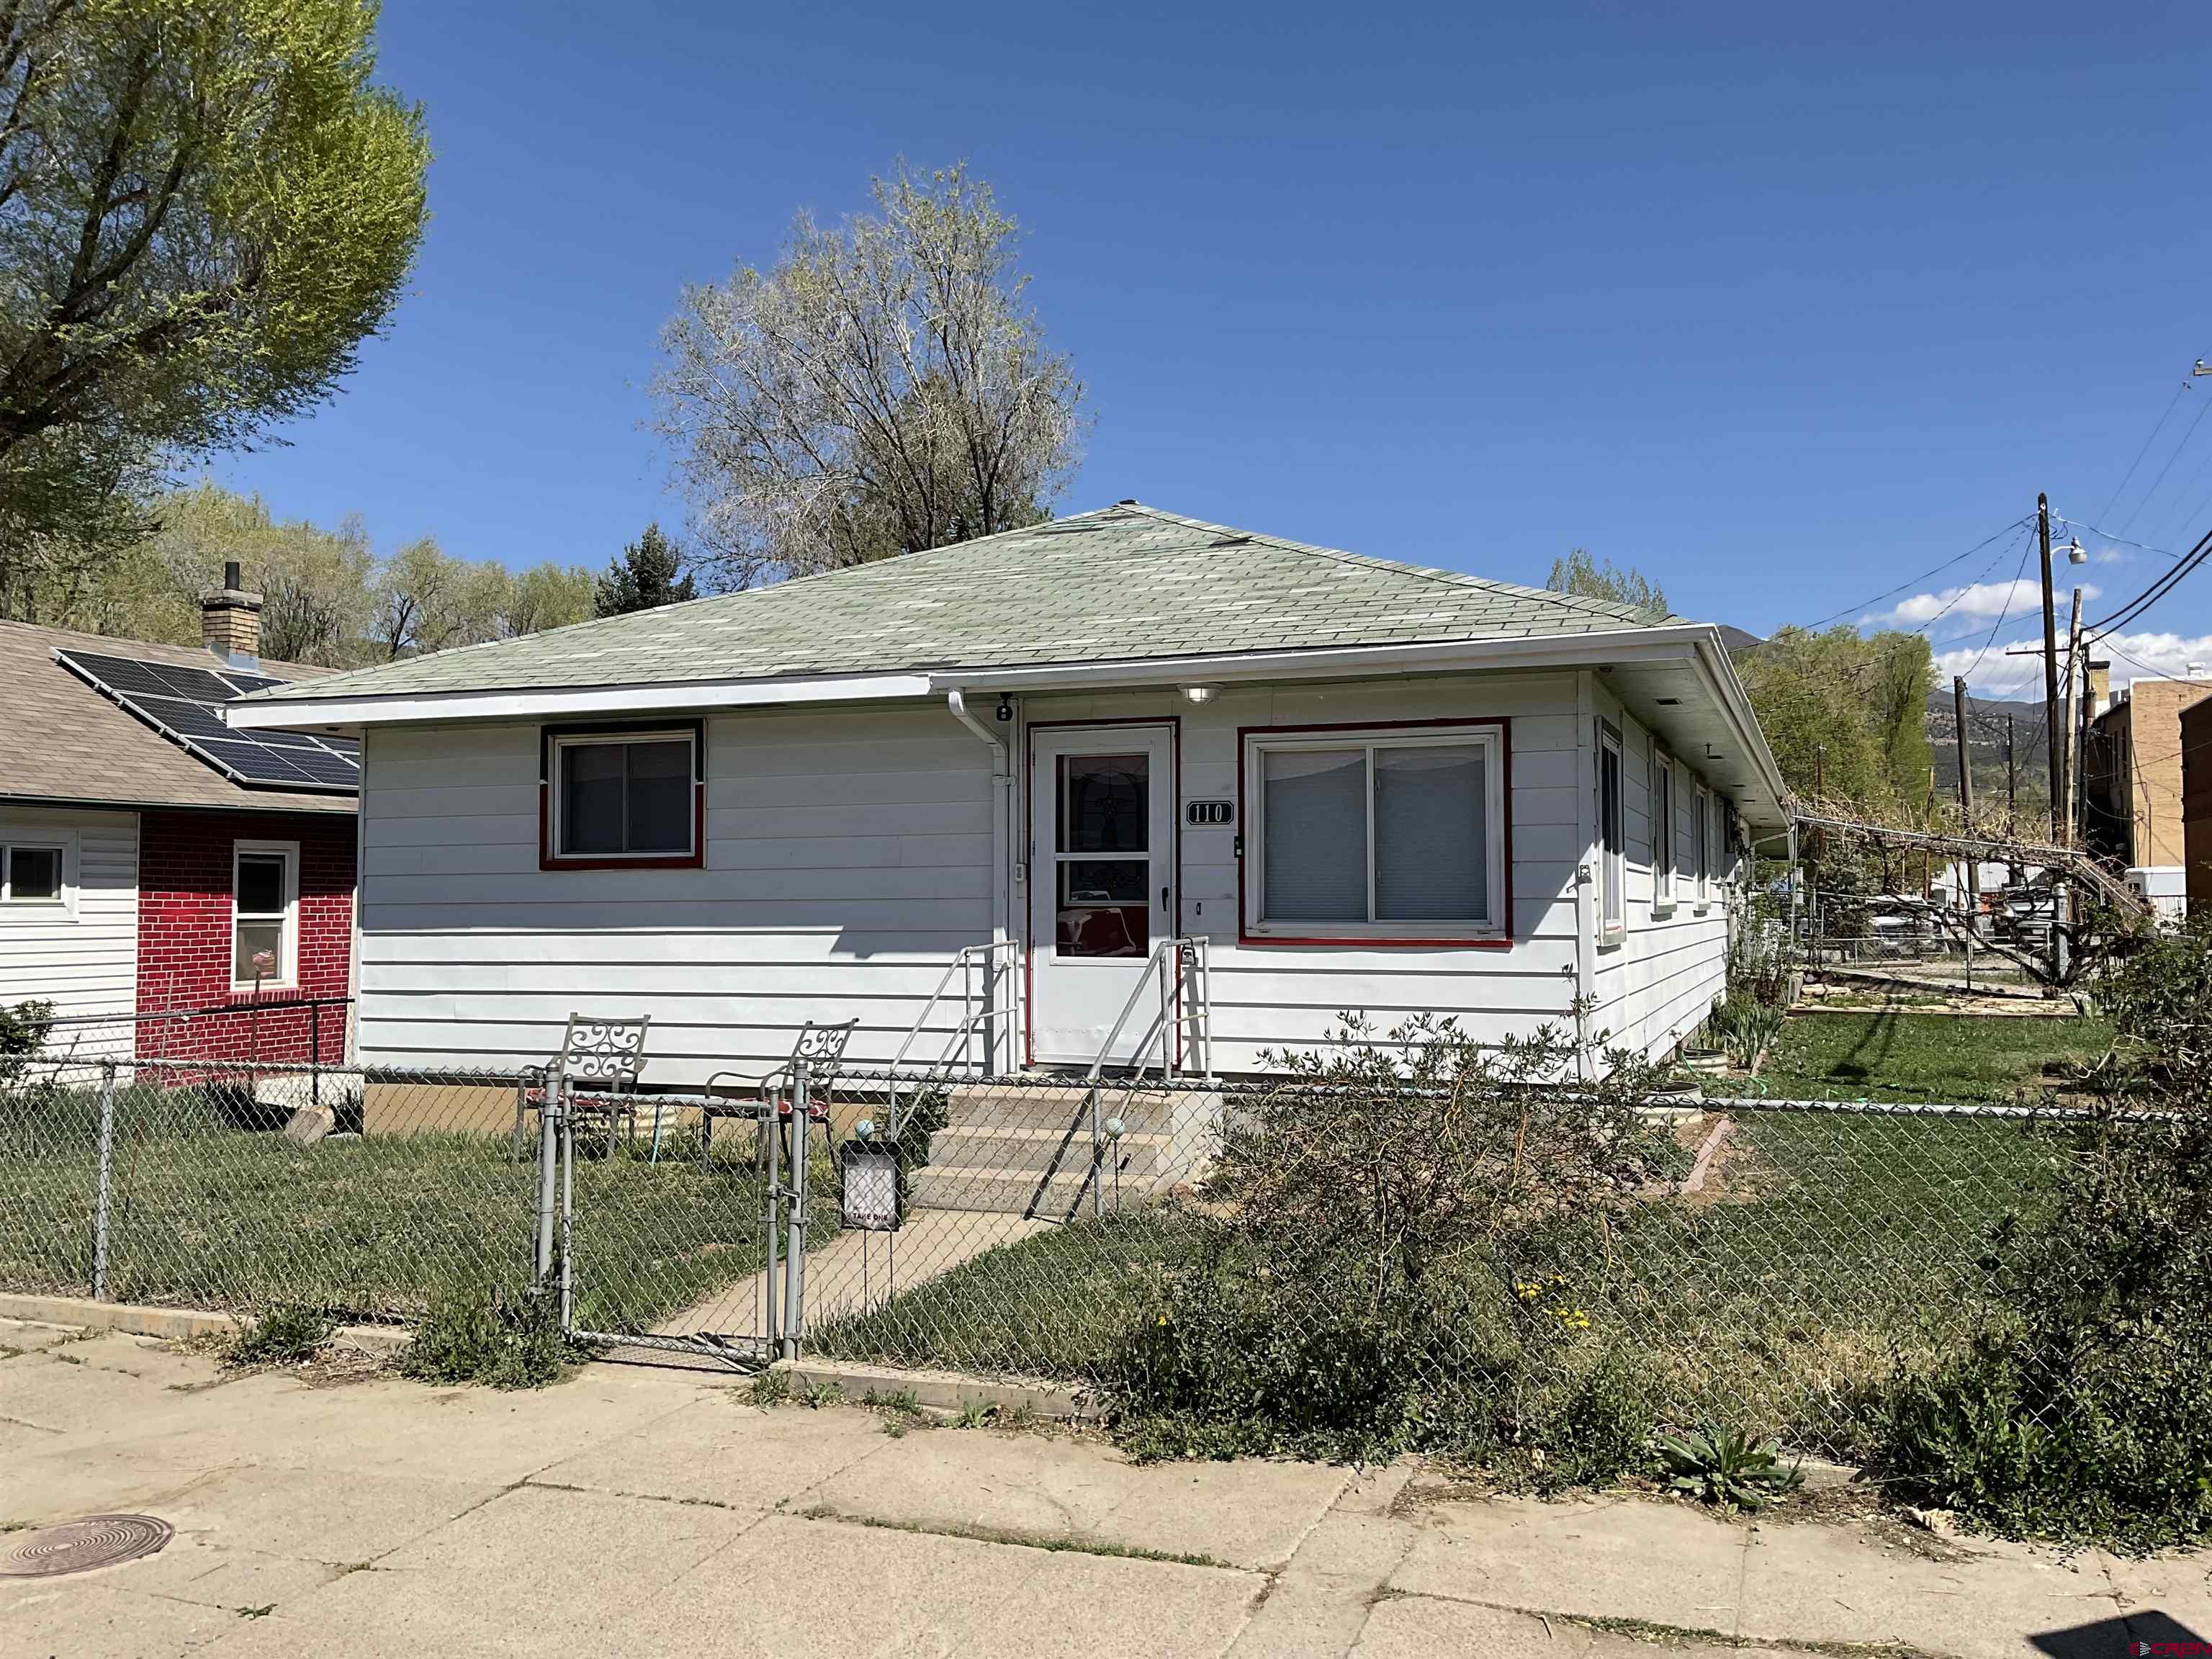 Photo of 110 2nd St in Paonia, CO